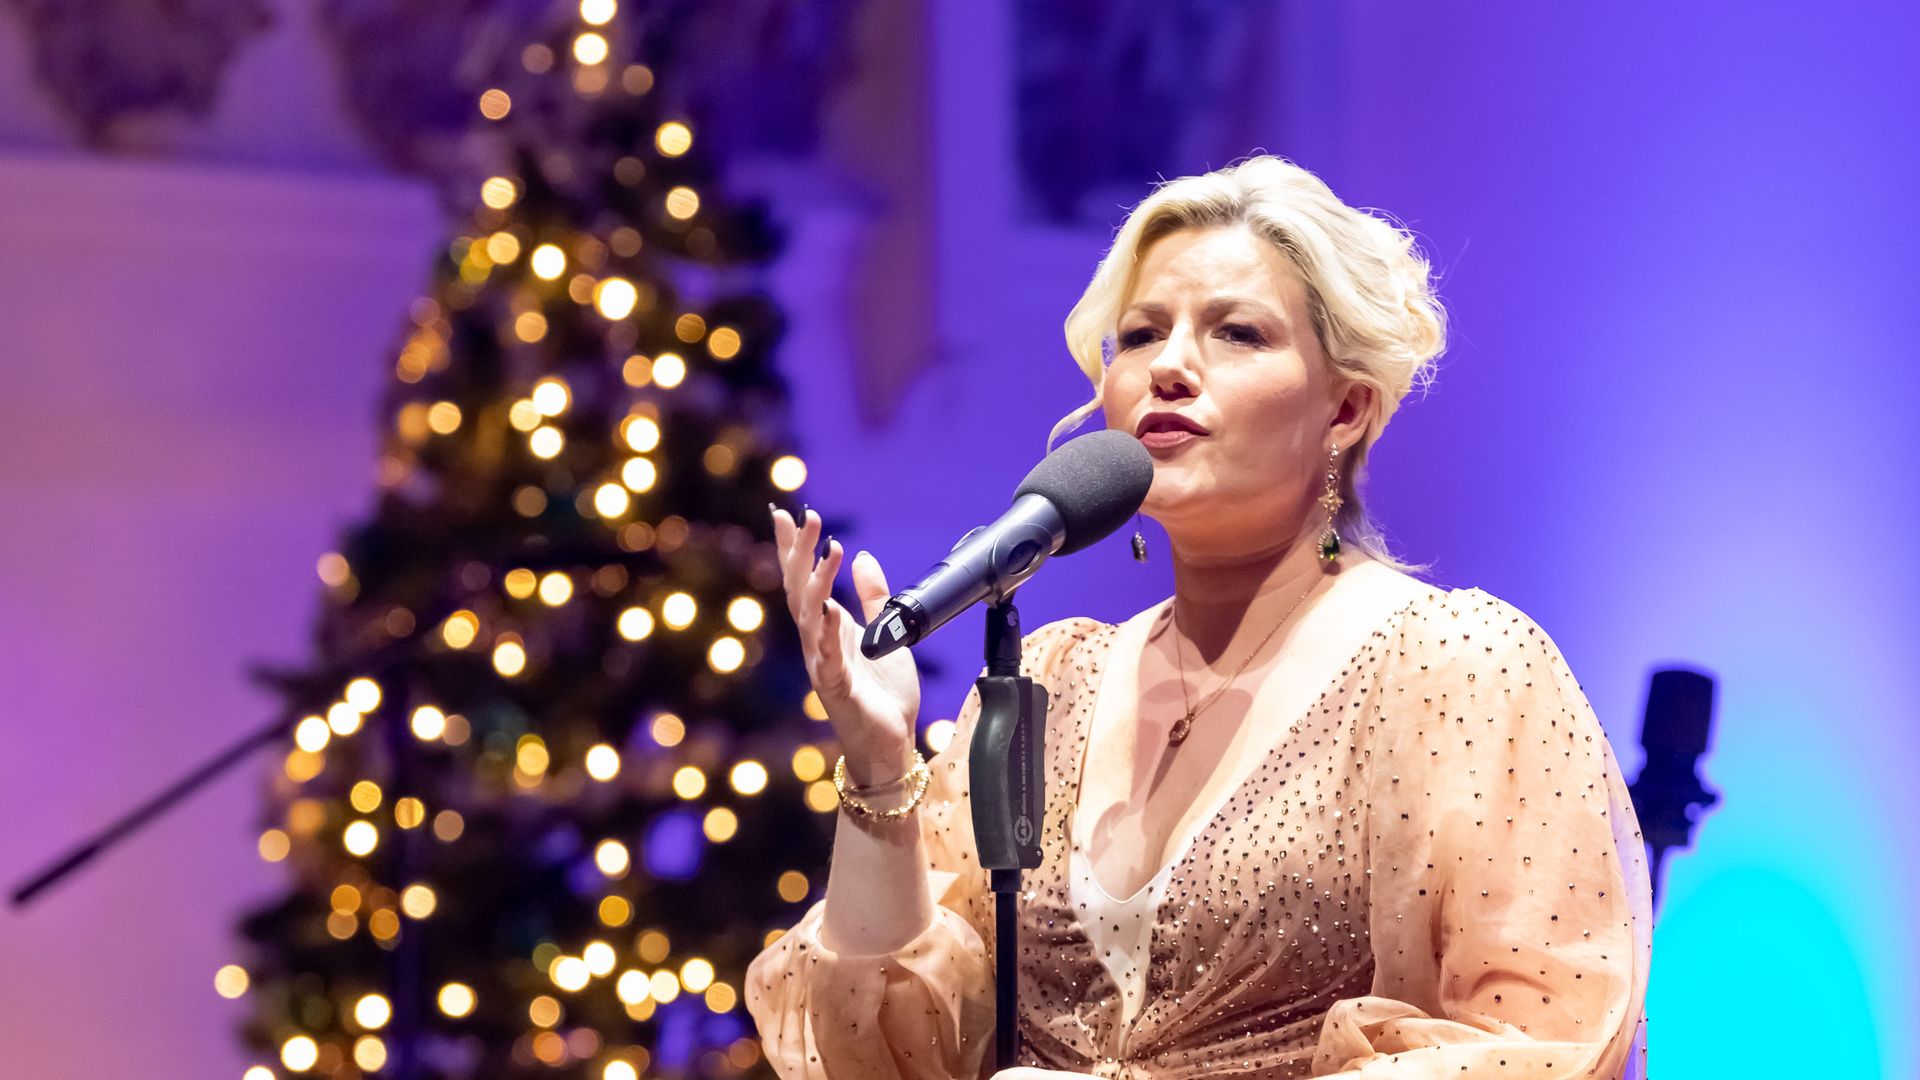 Natalie Rushdie at the NSPCC Christmas concert